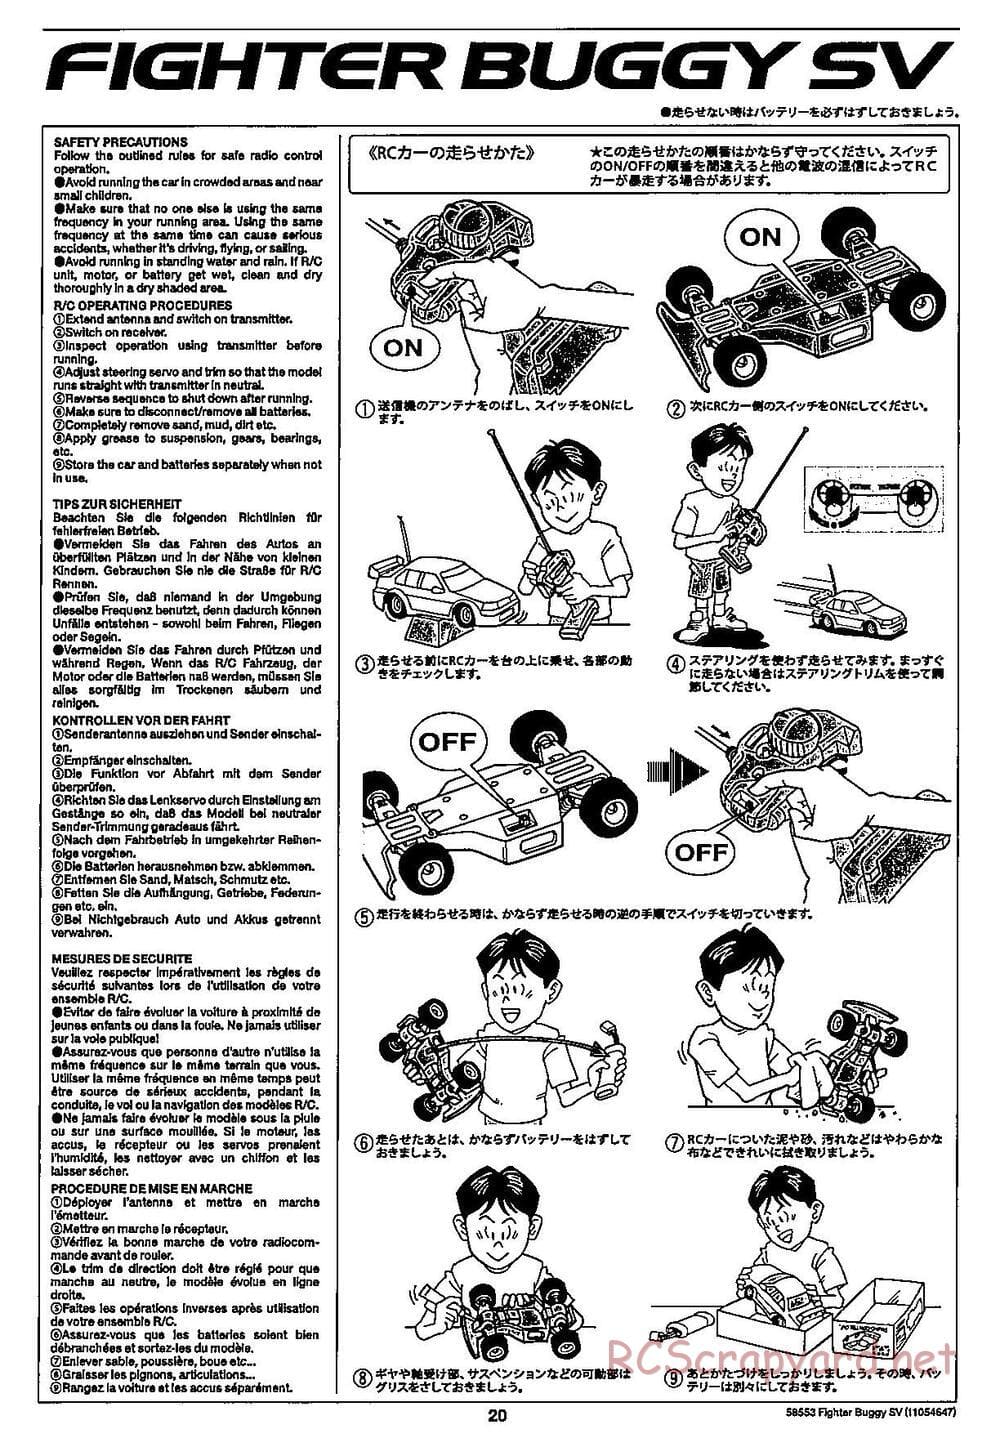 Tamiya - Fighter Buggy SV Chassis - Manual - Page 20